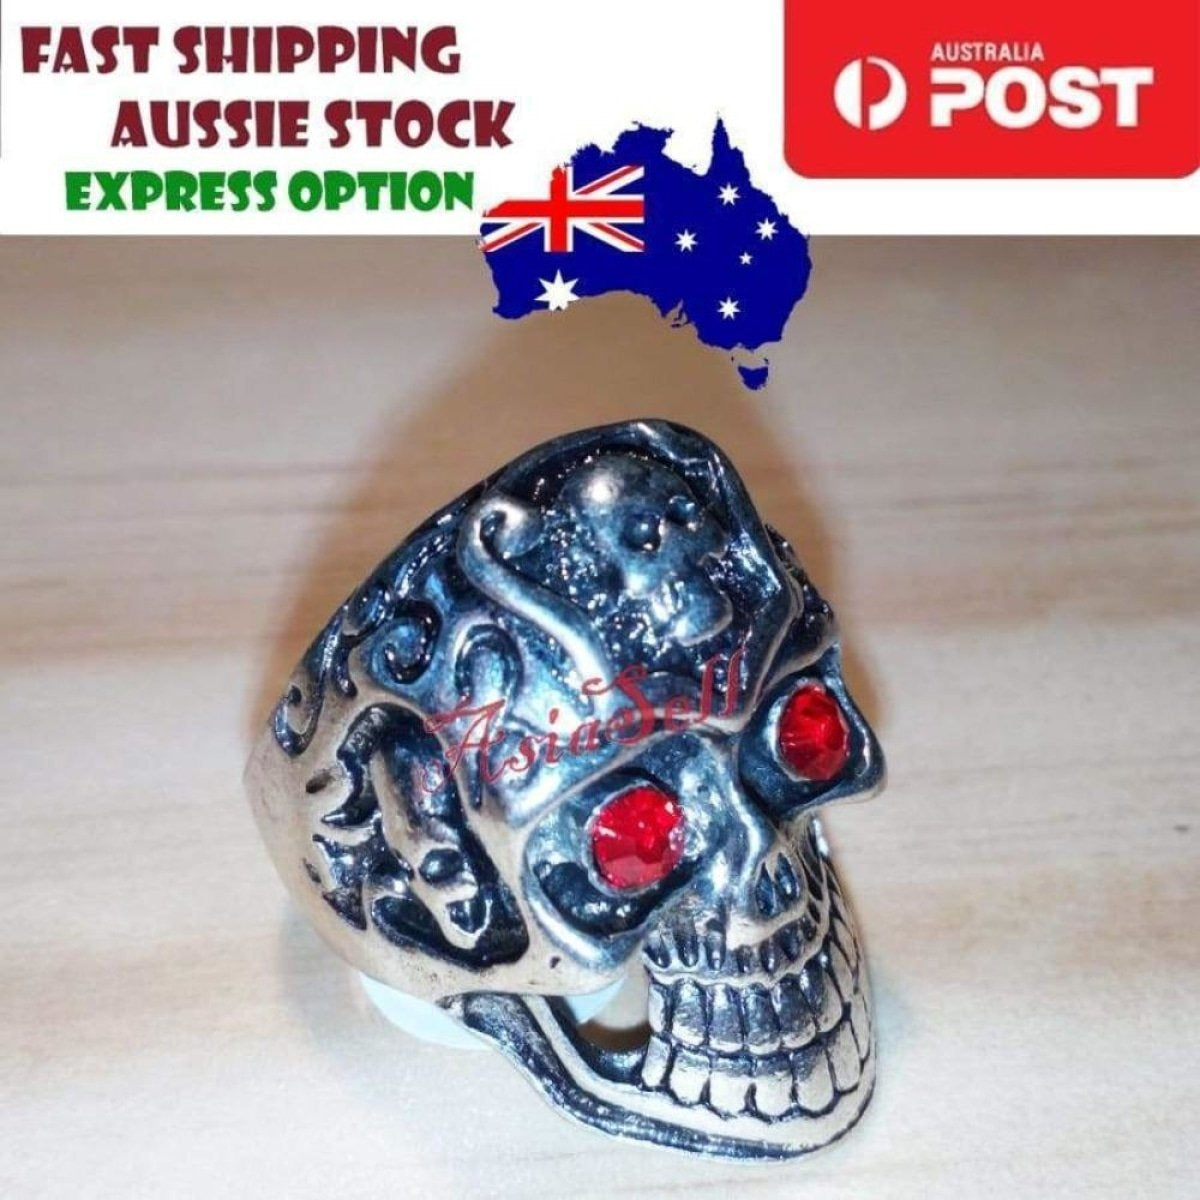 Stainless Steel Skull Ring Head Evil Ring Rings Black Silver Gold Silver Biker | Asia Sell  -  Type 5 Size 21 (U.S. 11) 65mm